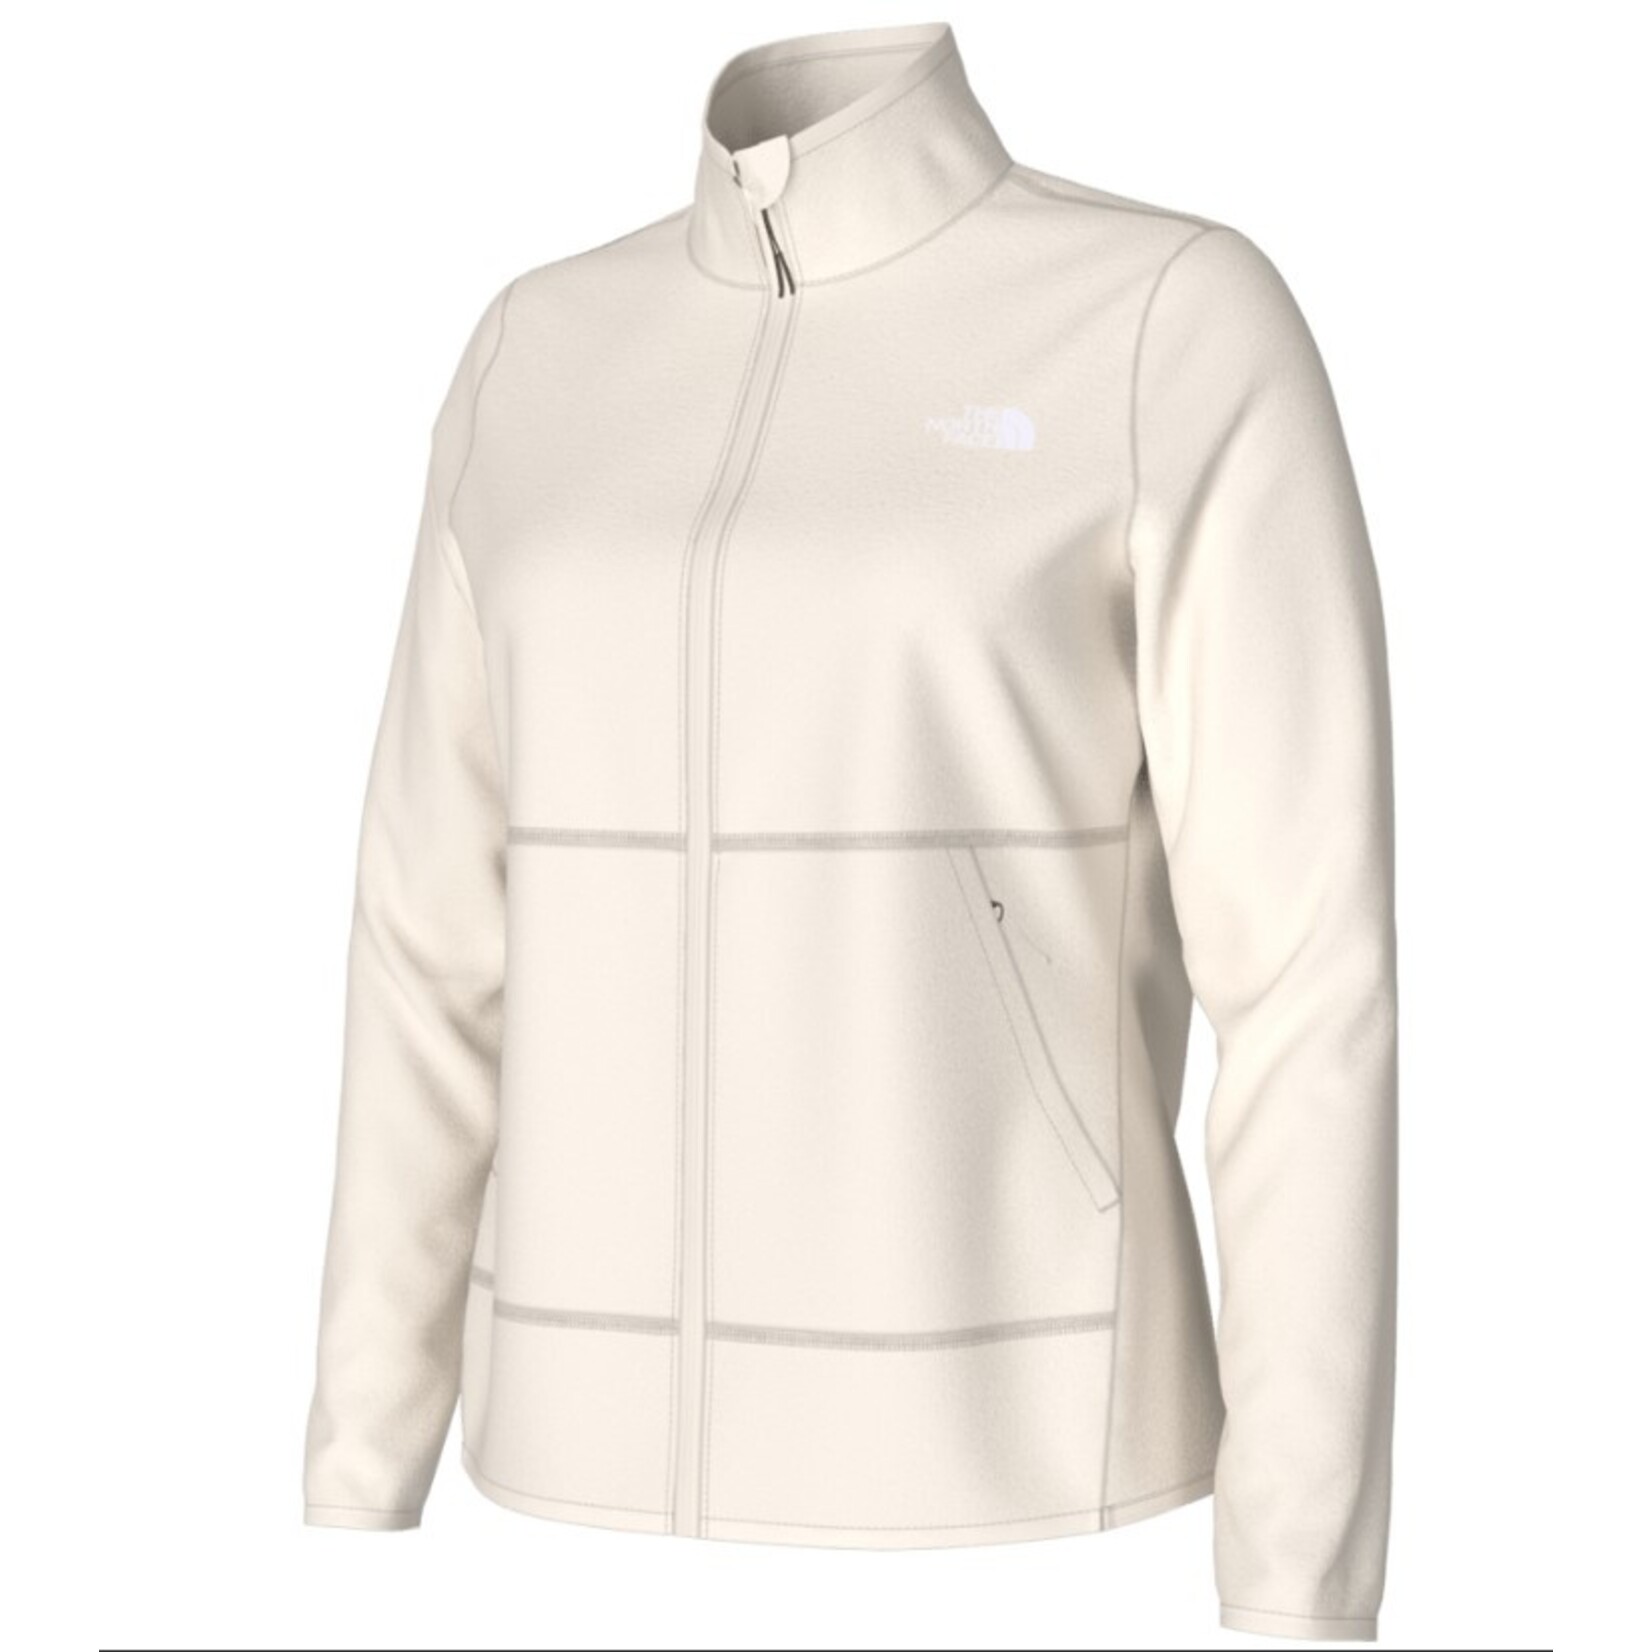 THE NORTH FACE Women's Canyonlands Full Zip-24